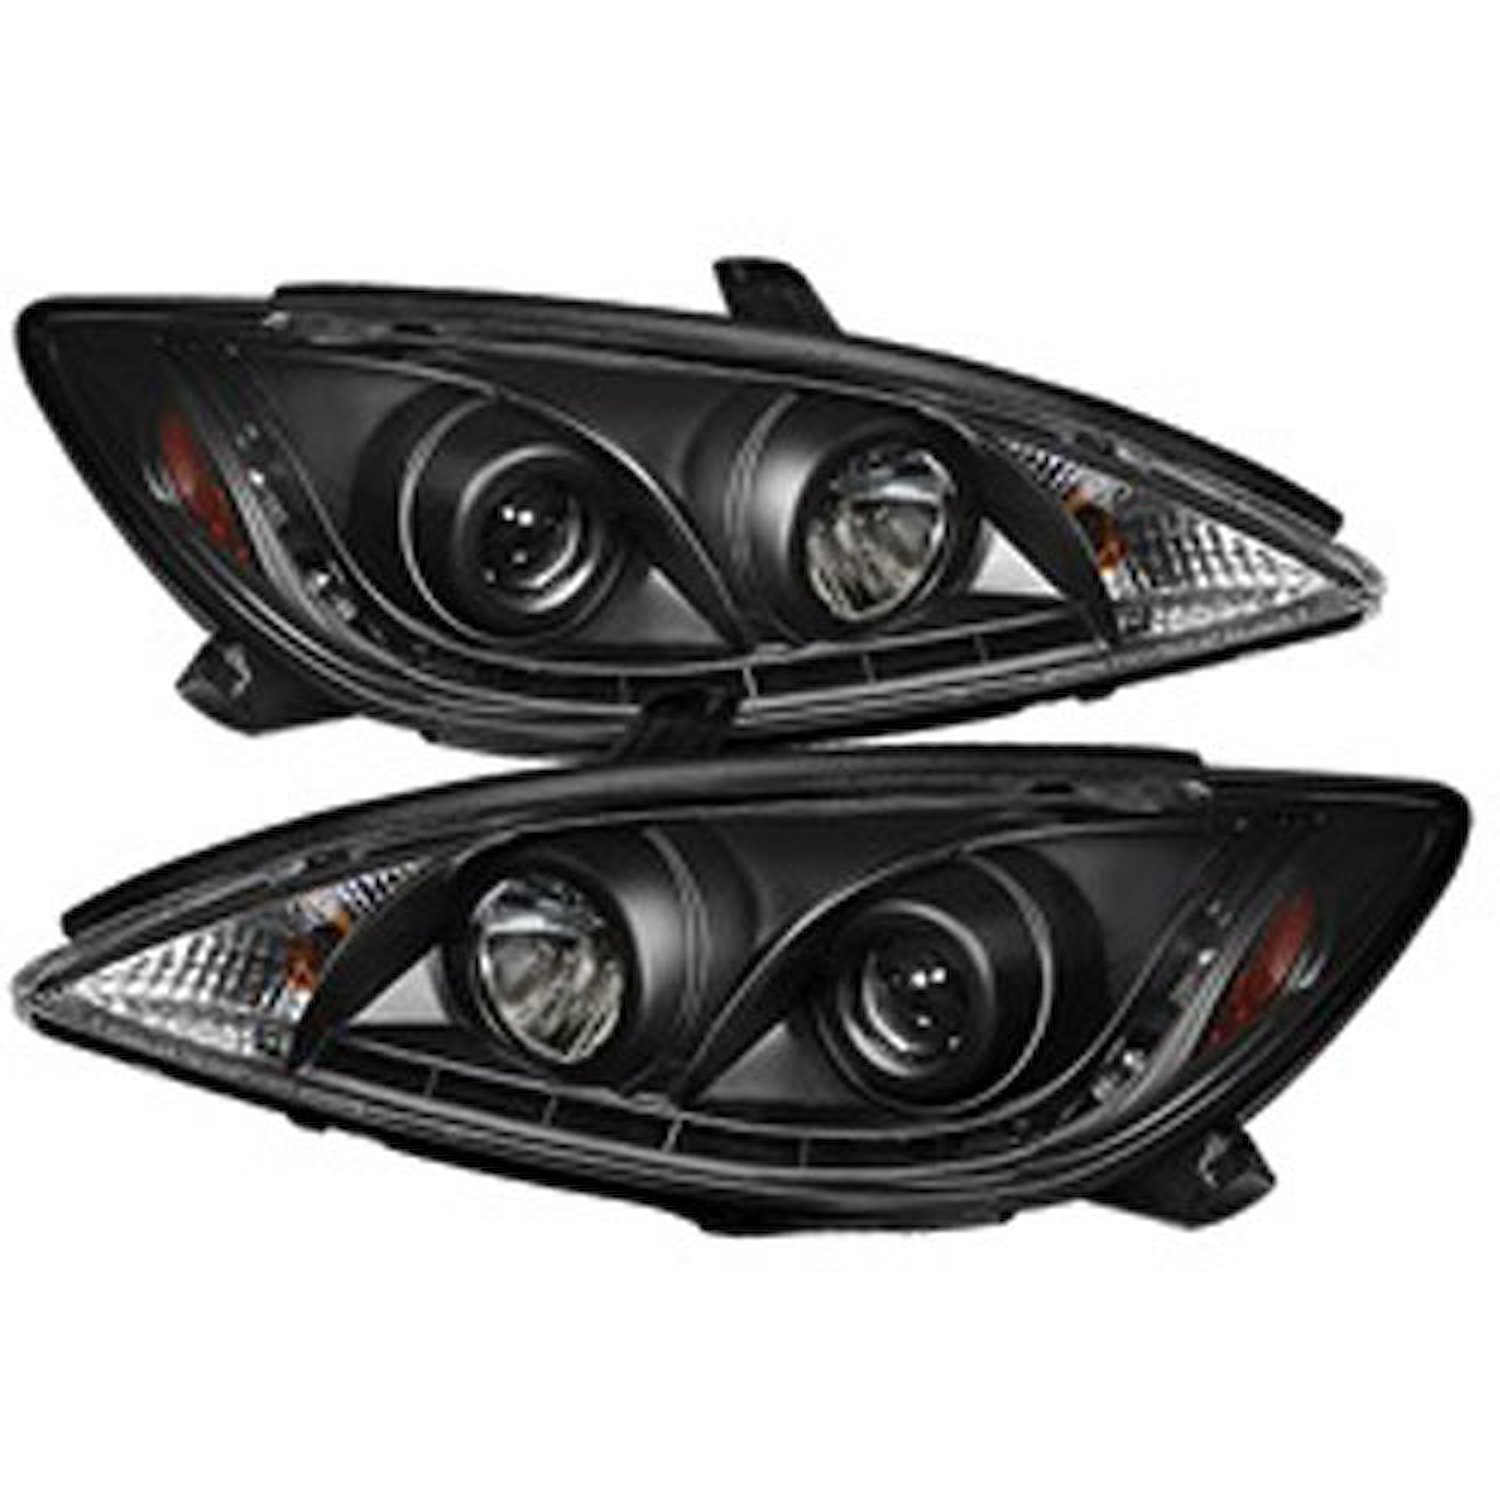 DRL LED Projector Headlights 2002-2006 Toyota Camry